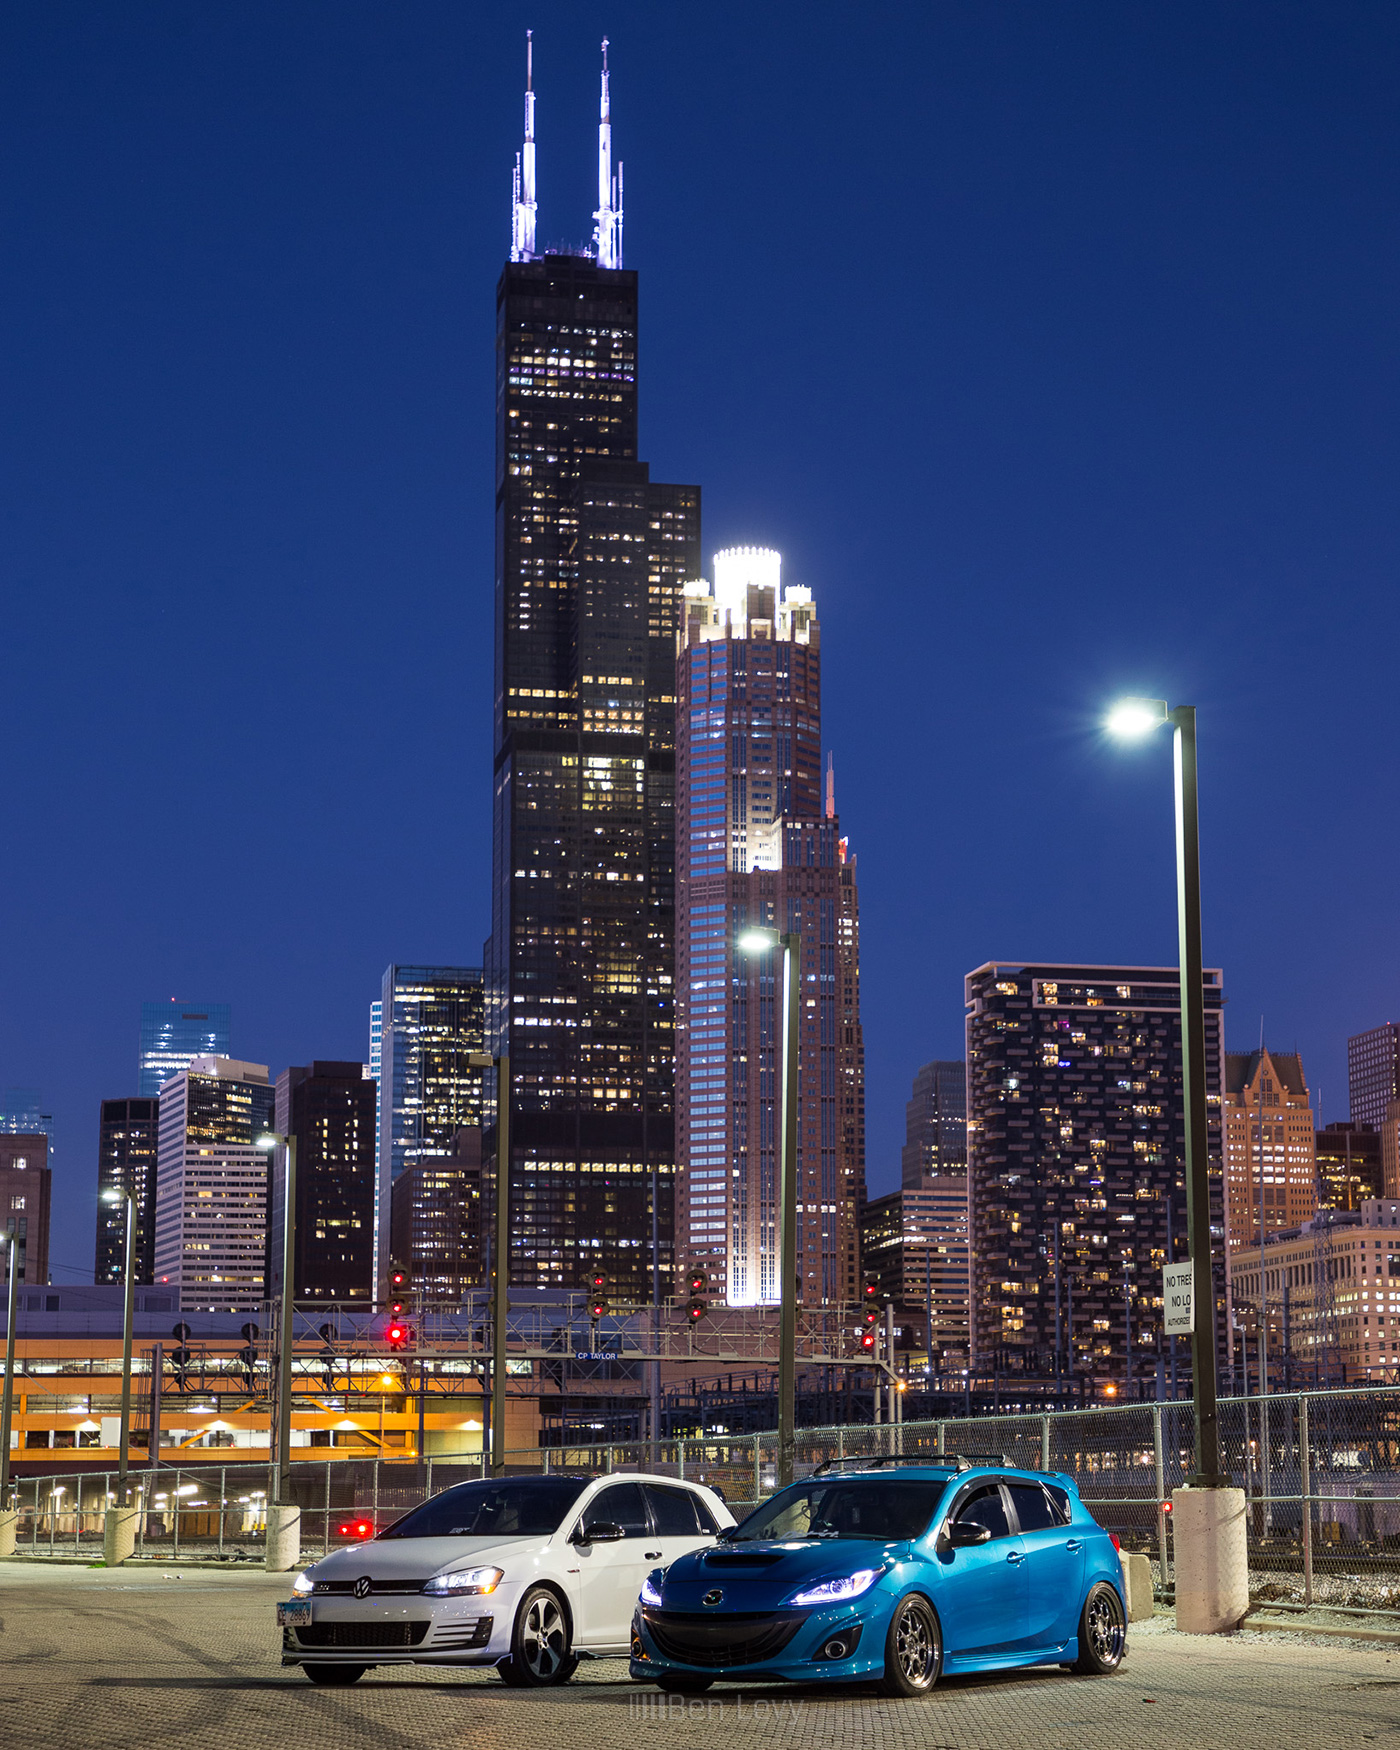 Car Photoshoot with the Sears Tower in Background